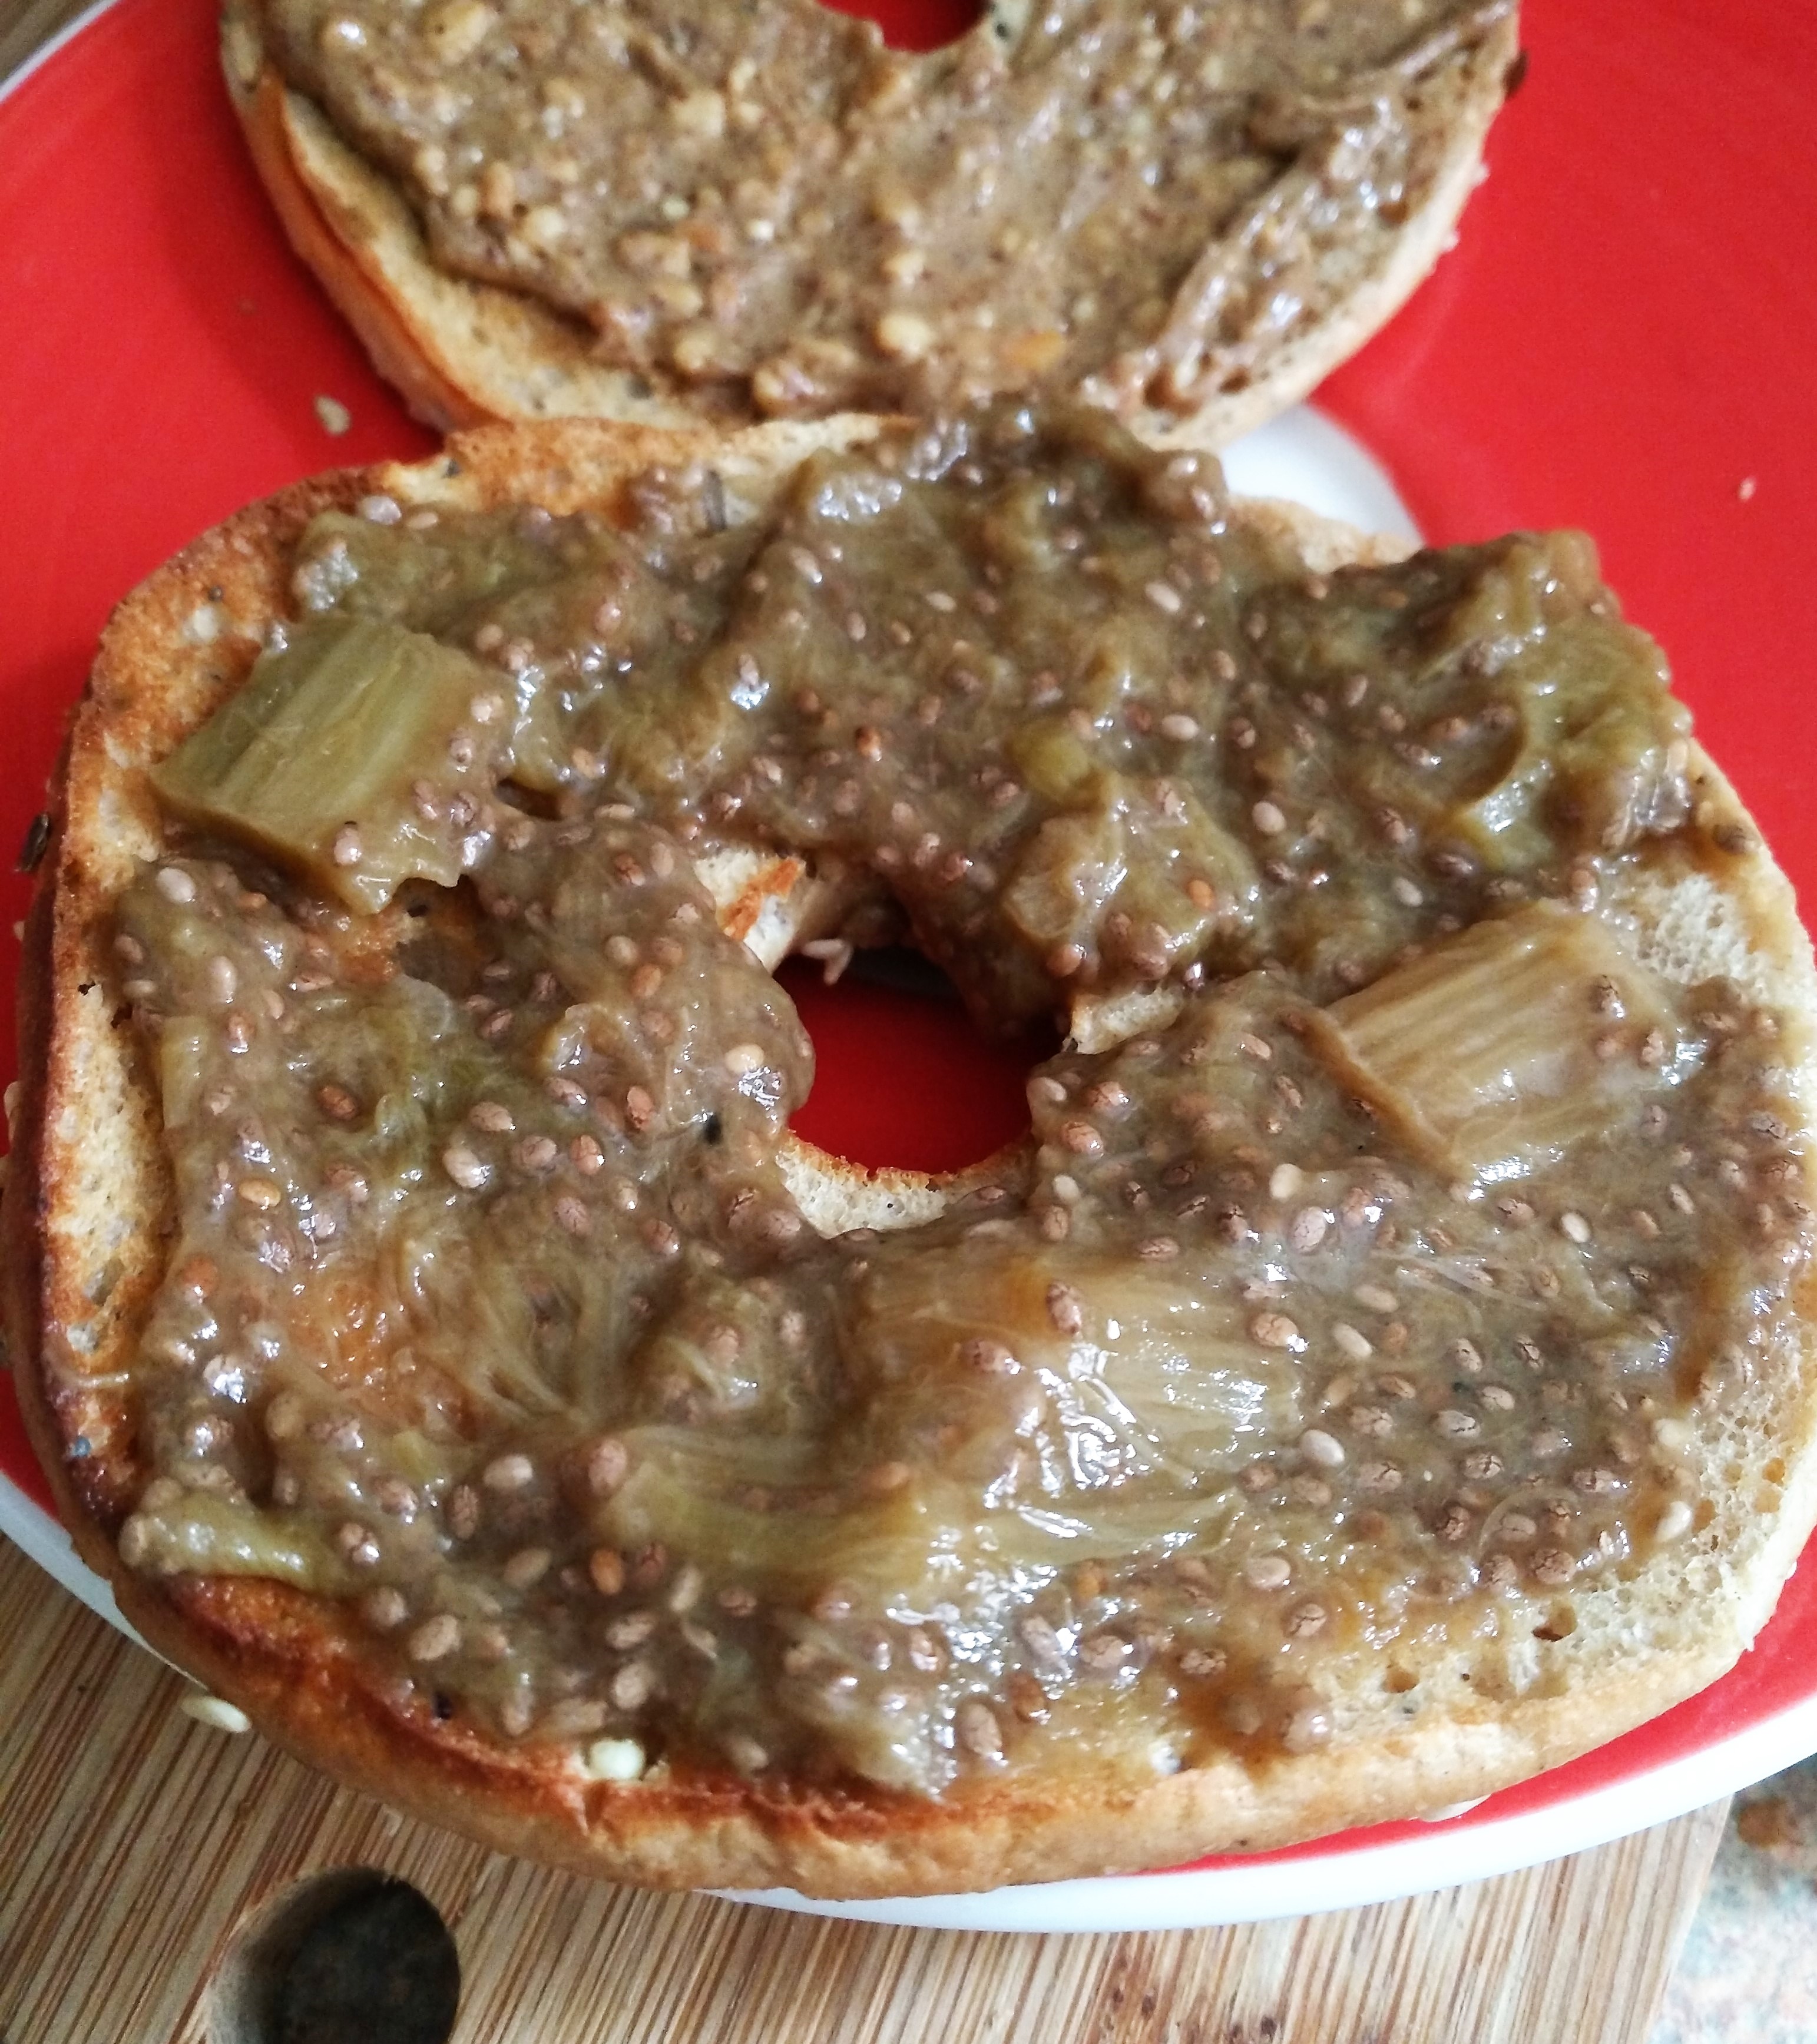 Rhubarb & Ginger Chia jam on a seeded bagel on a red plate on a wooden hedgehog shaped chopping board. Delicious!